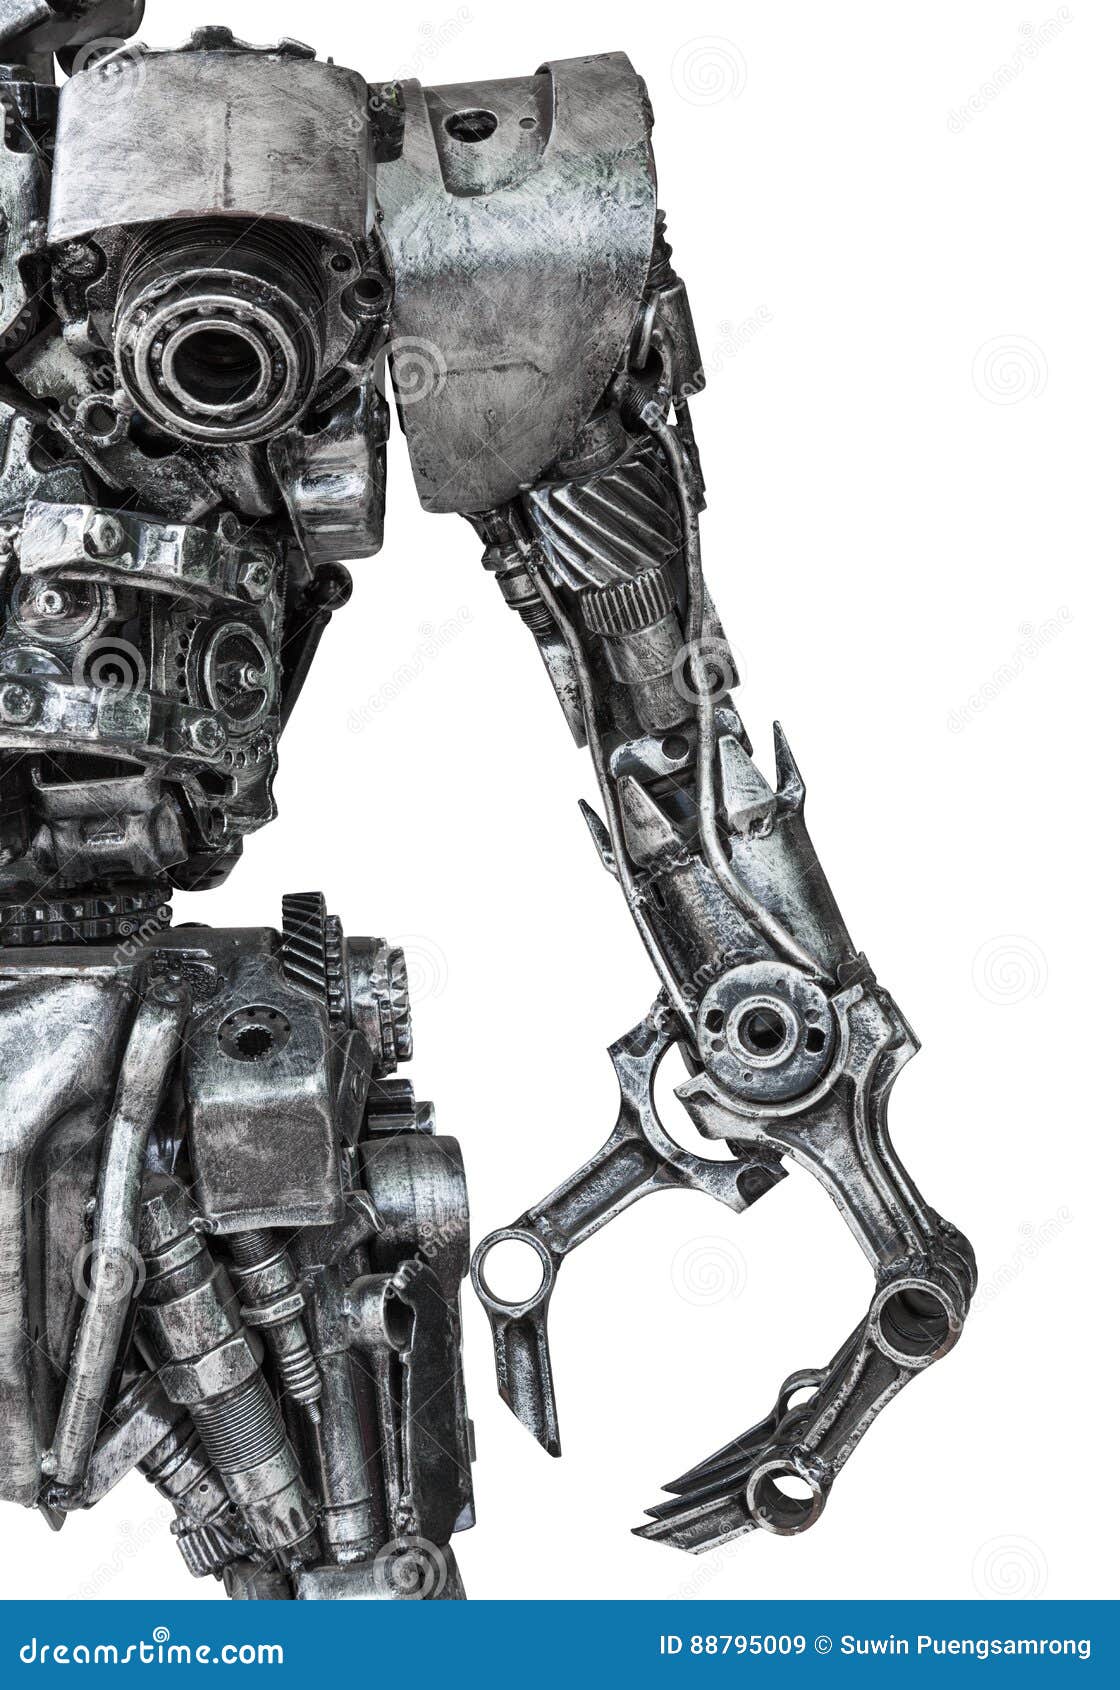 Closeup Body Of Metallic Robot Made From Auto Parts With Machine Stock